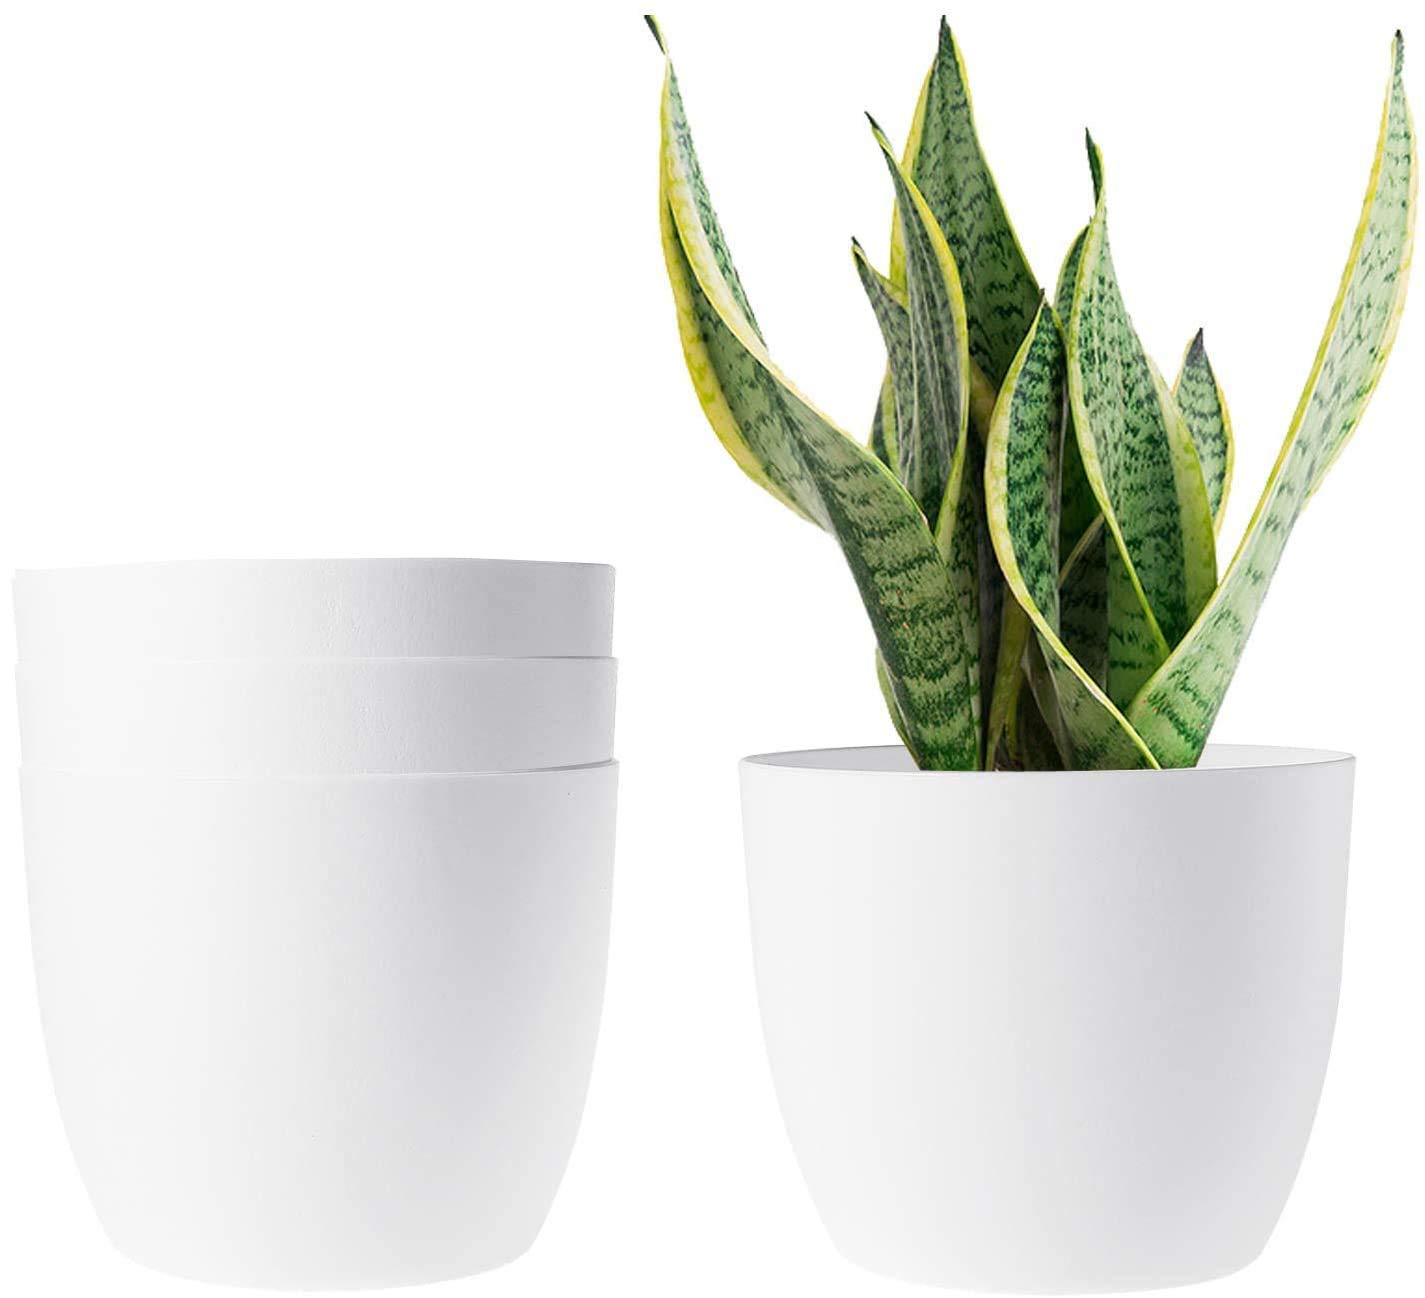 rionto white flower pots for home decoration (pack of 3) | 5 inch eco friendly plastic pots for plants | with drainage holes | ideal for plant hangers | milky white plant pots for balcony and indoor decor